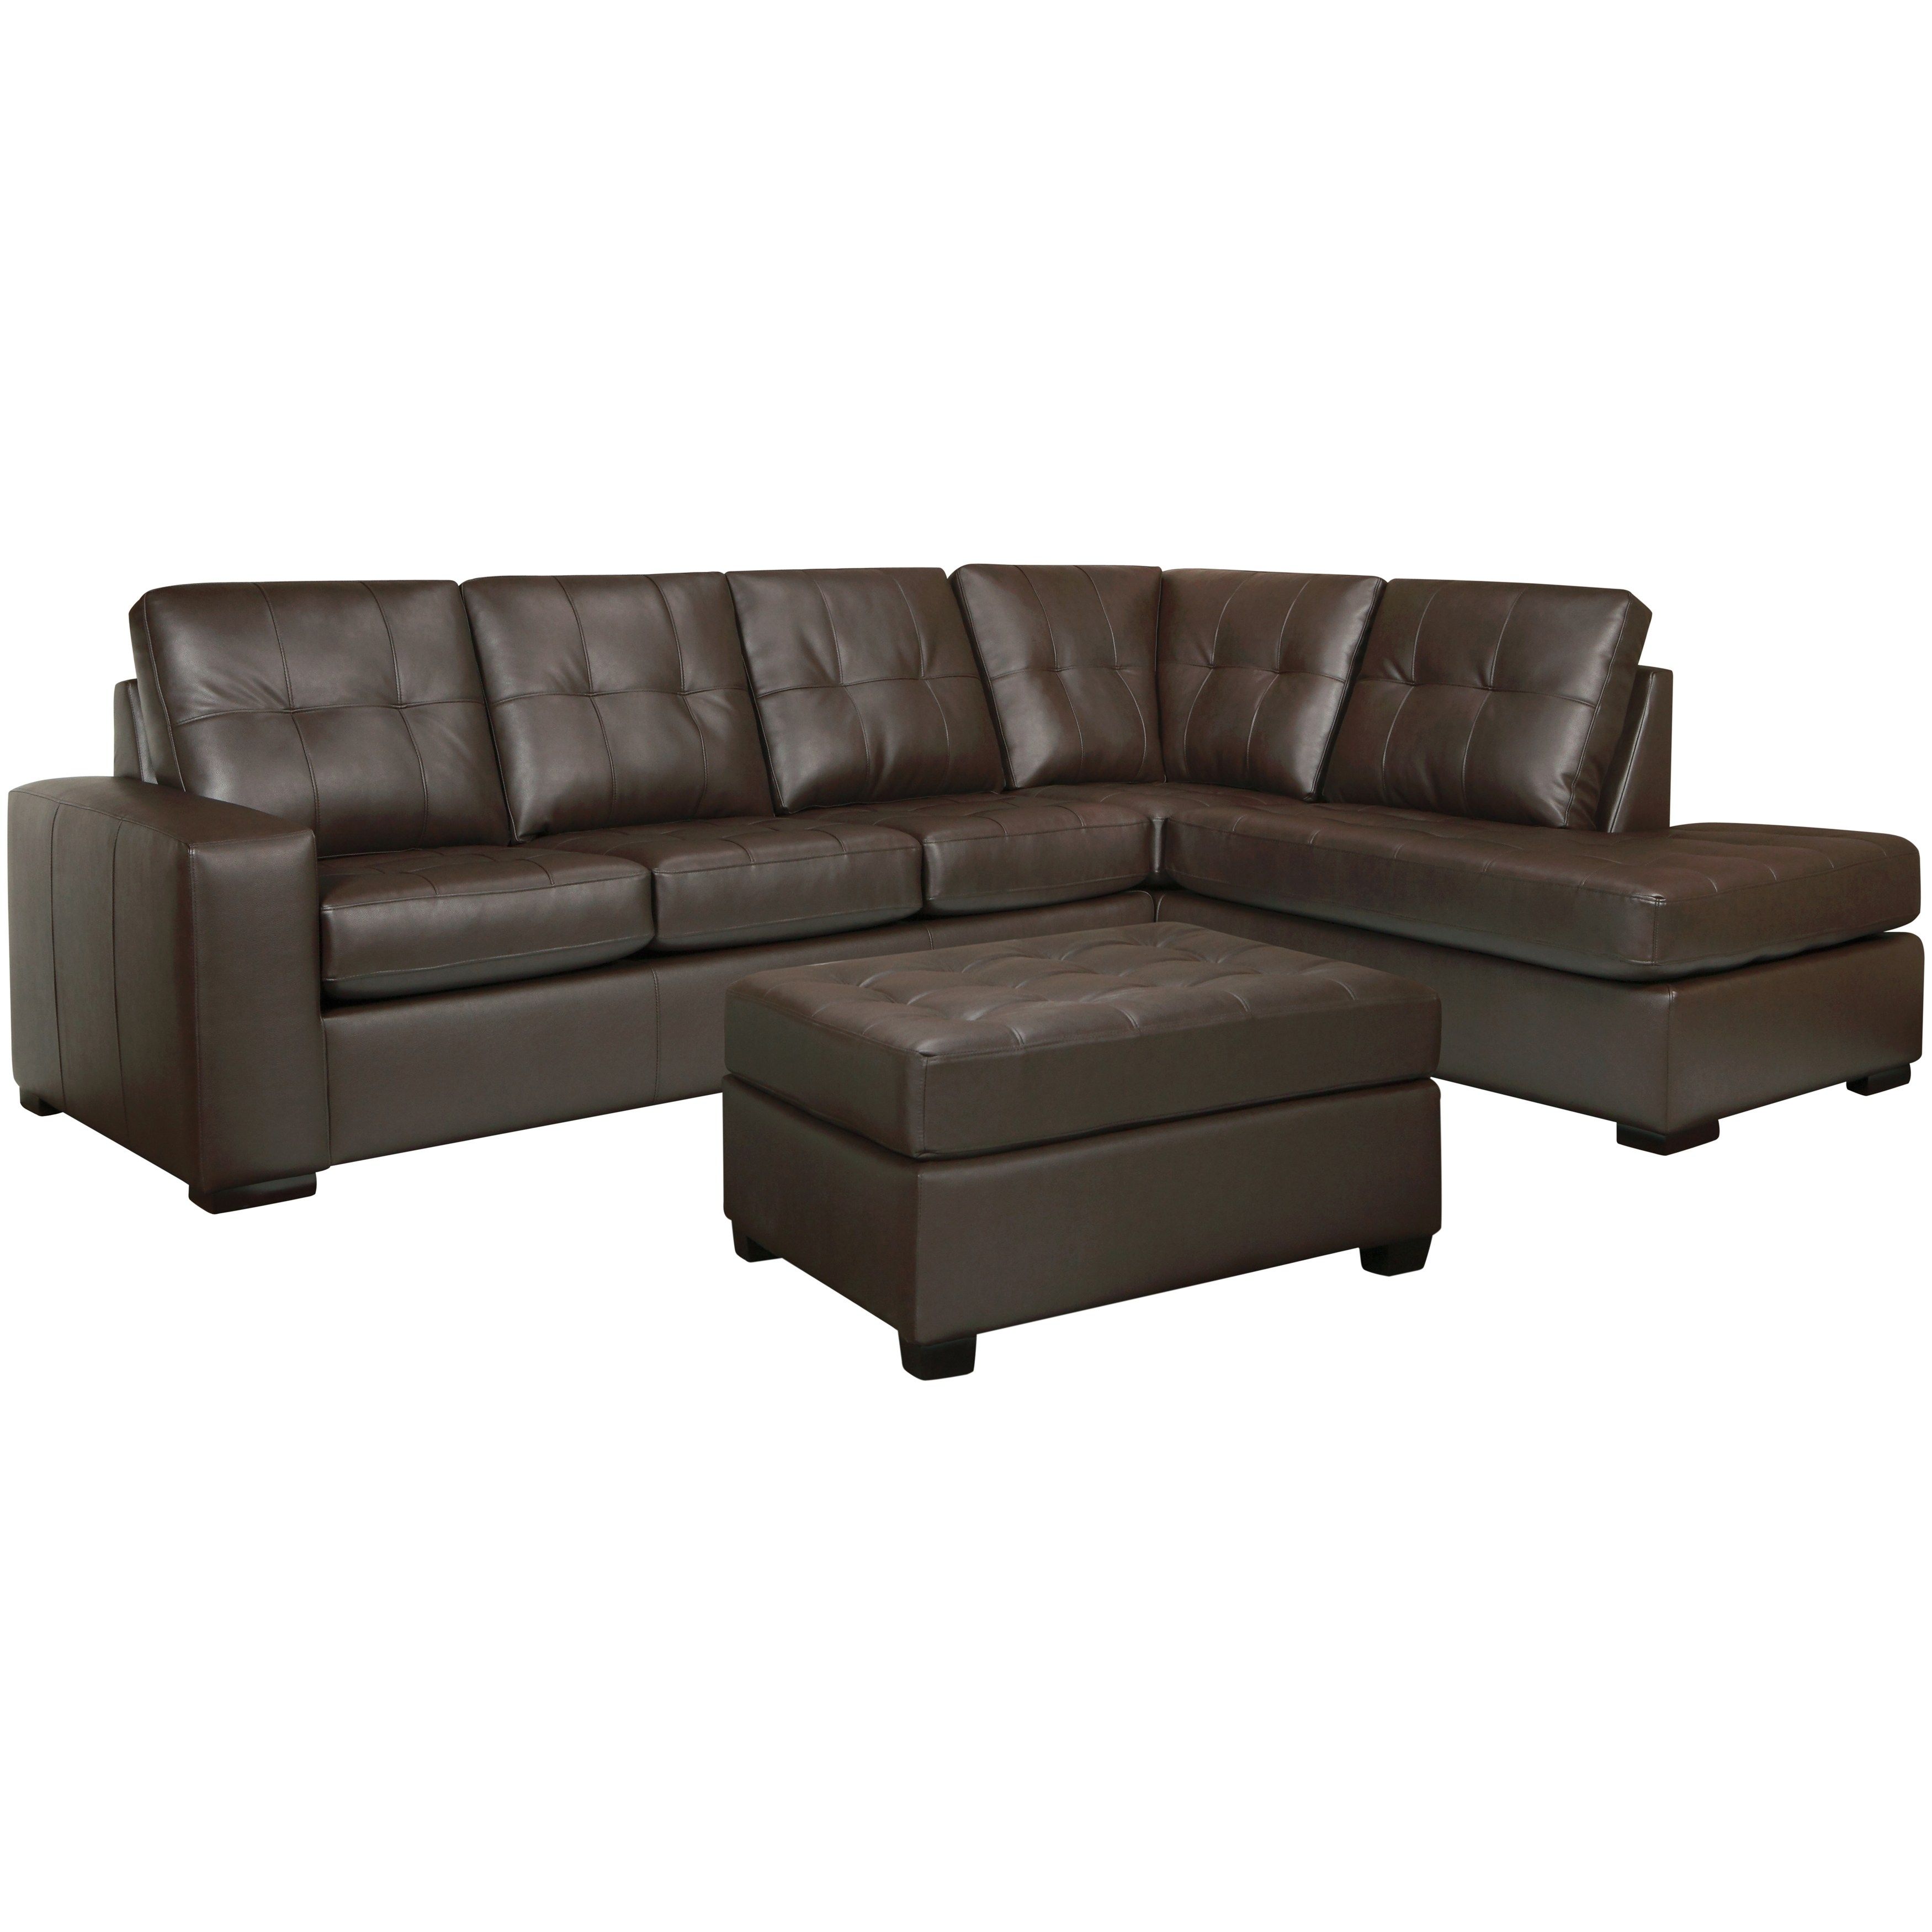 Furniture Brown Leather Sectional Couches Craigslist Missoula Intended For Craigslist Leather Sofa (View 14 of 15)